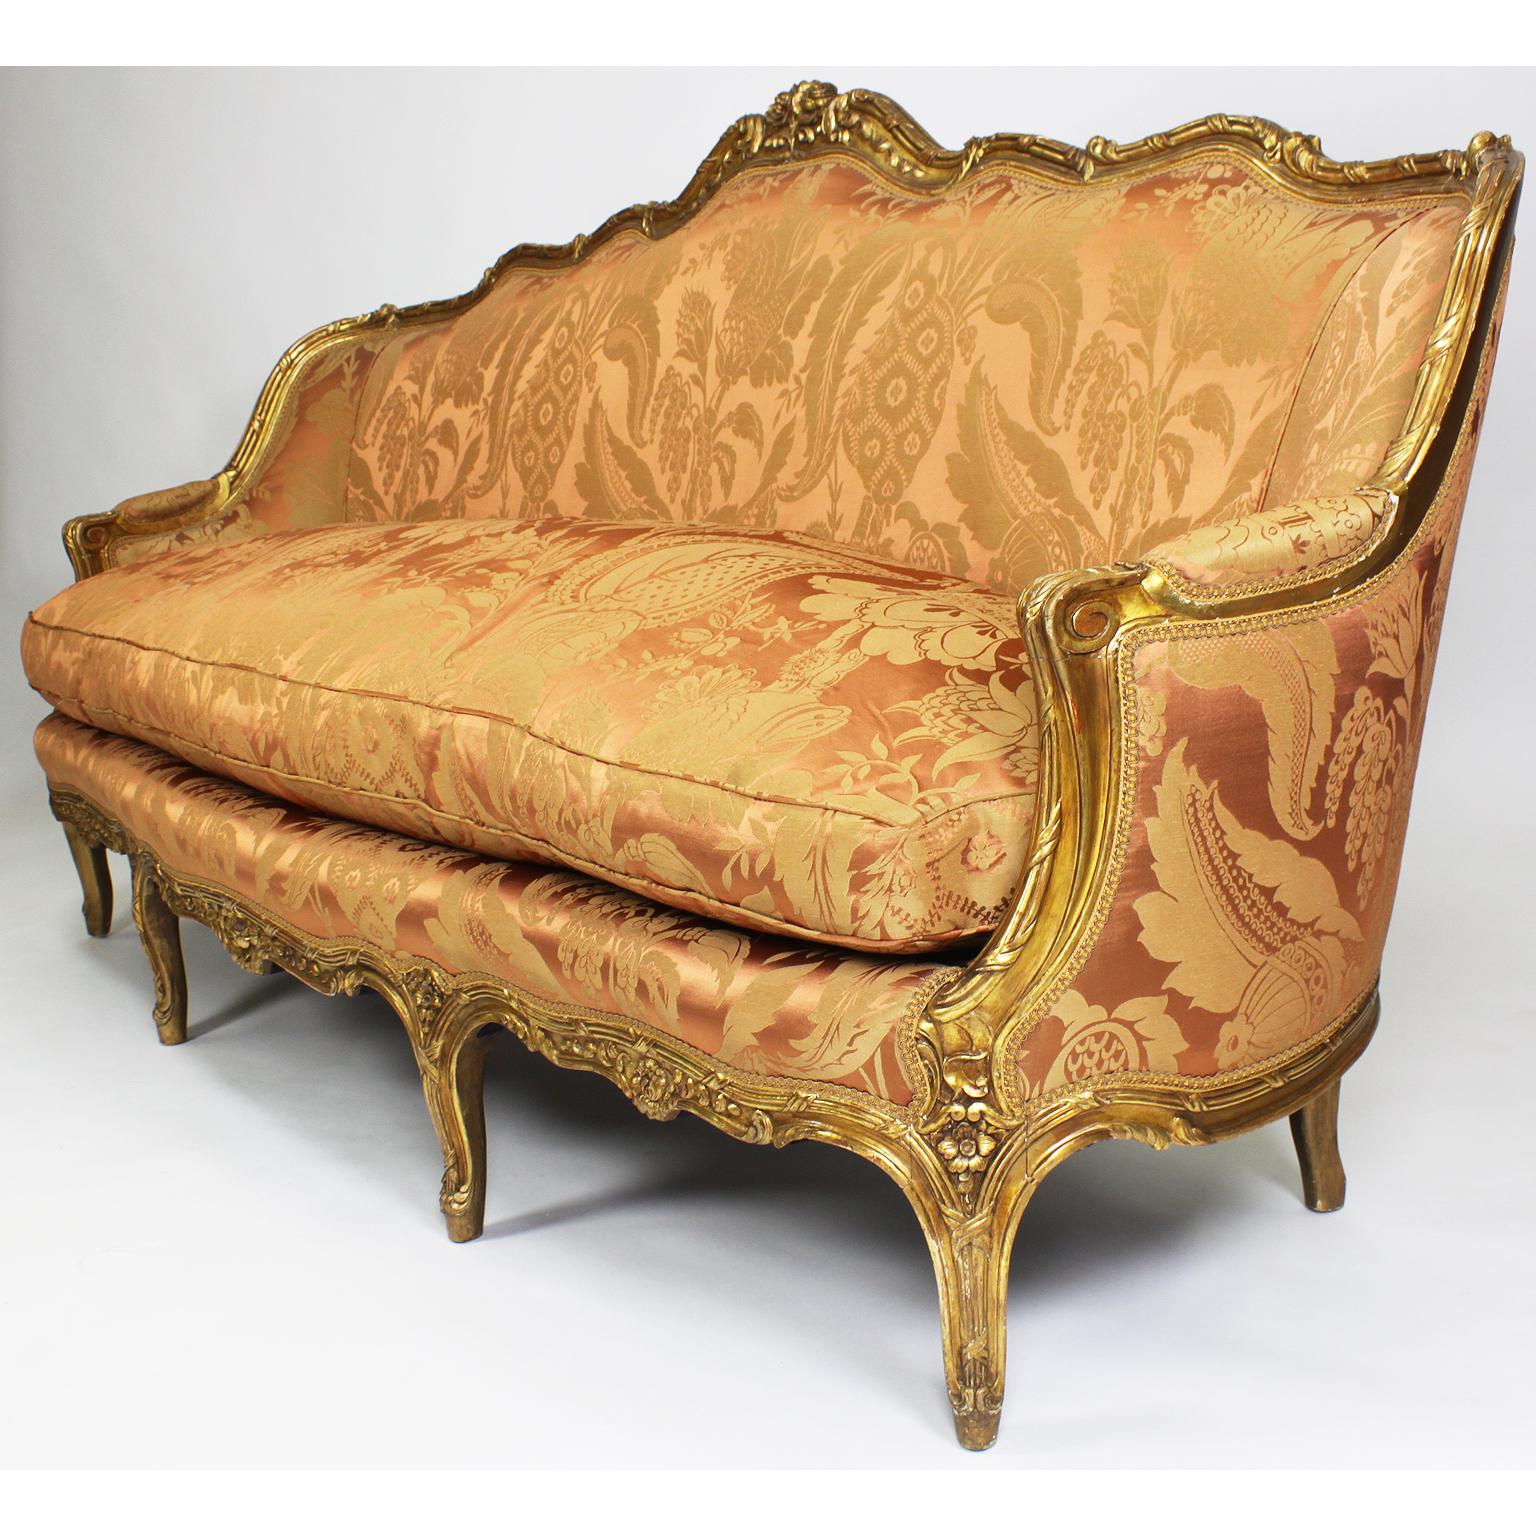 A fine French Louis XV style giltwood carved bergère settee (sofa). The serpentine carved gilded frame crowned with floral design, eight cabriolet legs with a padded backseat, sides and back, with a large cushion pillow seat upholstered in a recent